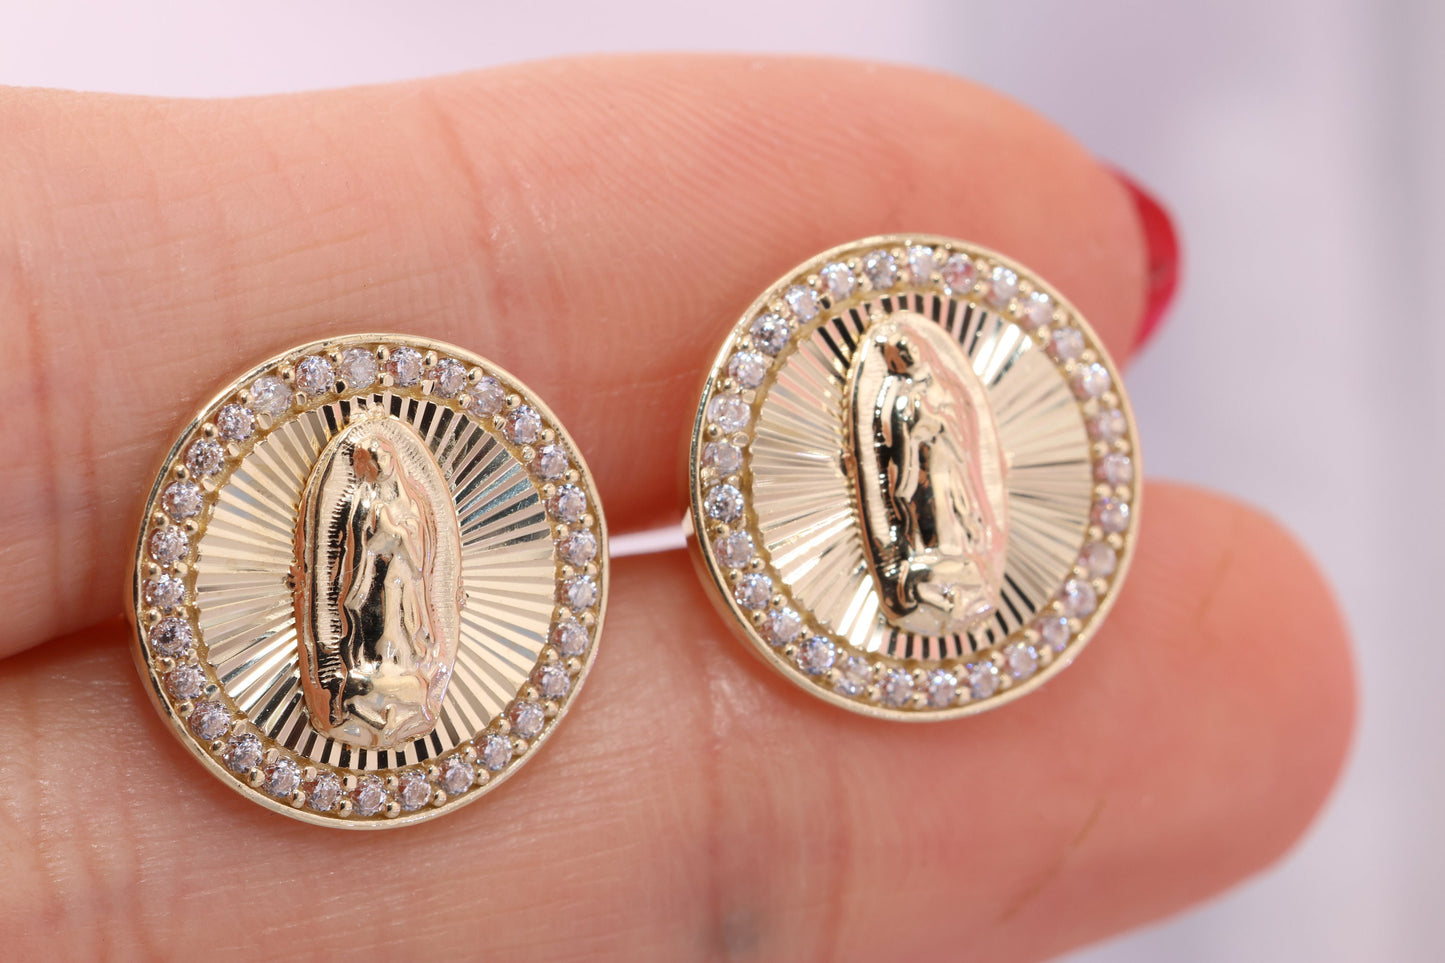 14k Solid Gold Virgin Mary Virgen Maria Lady Guadalupe Earrings I